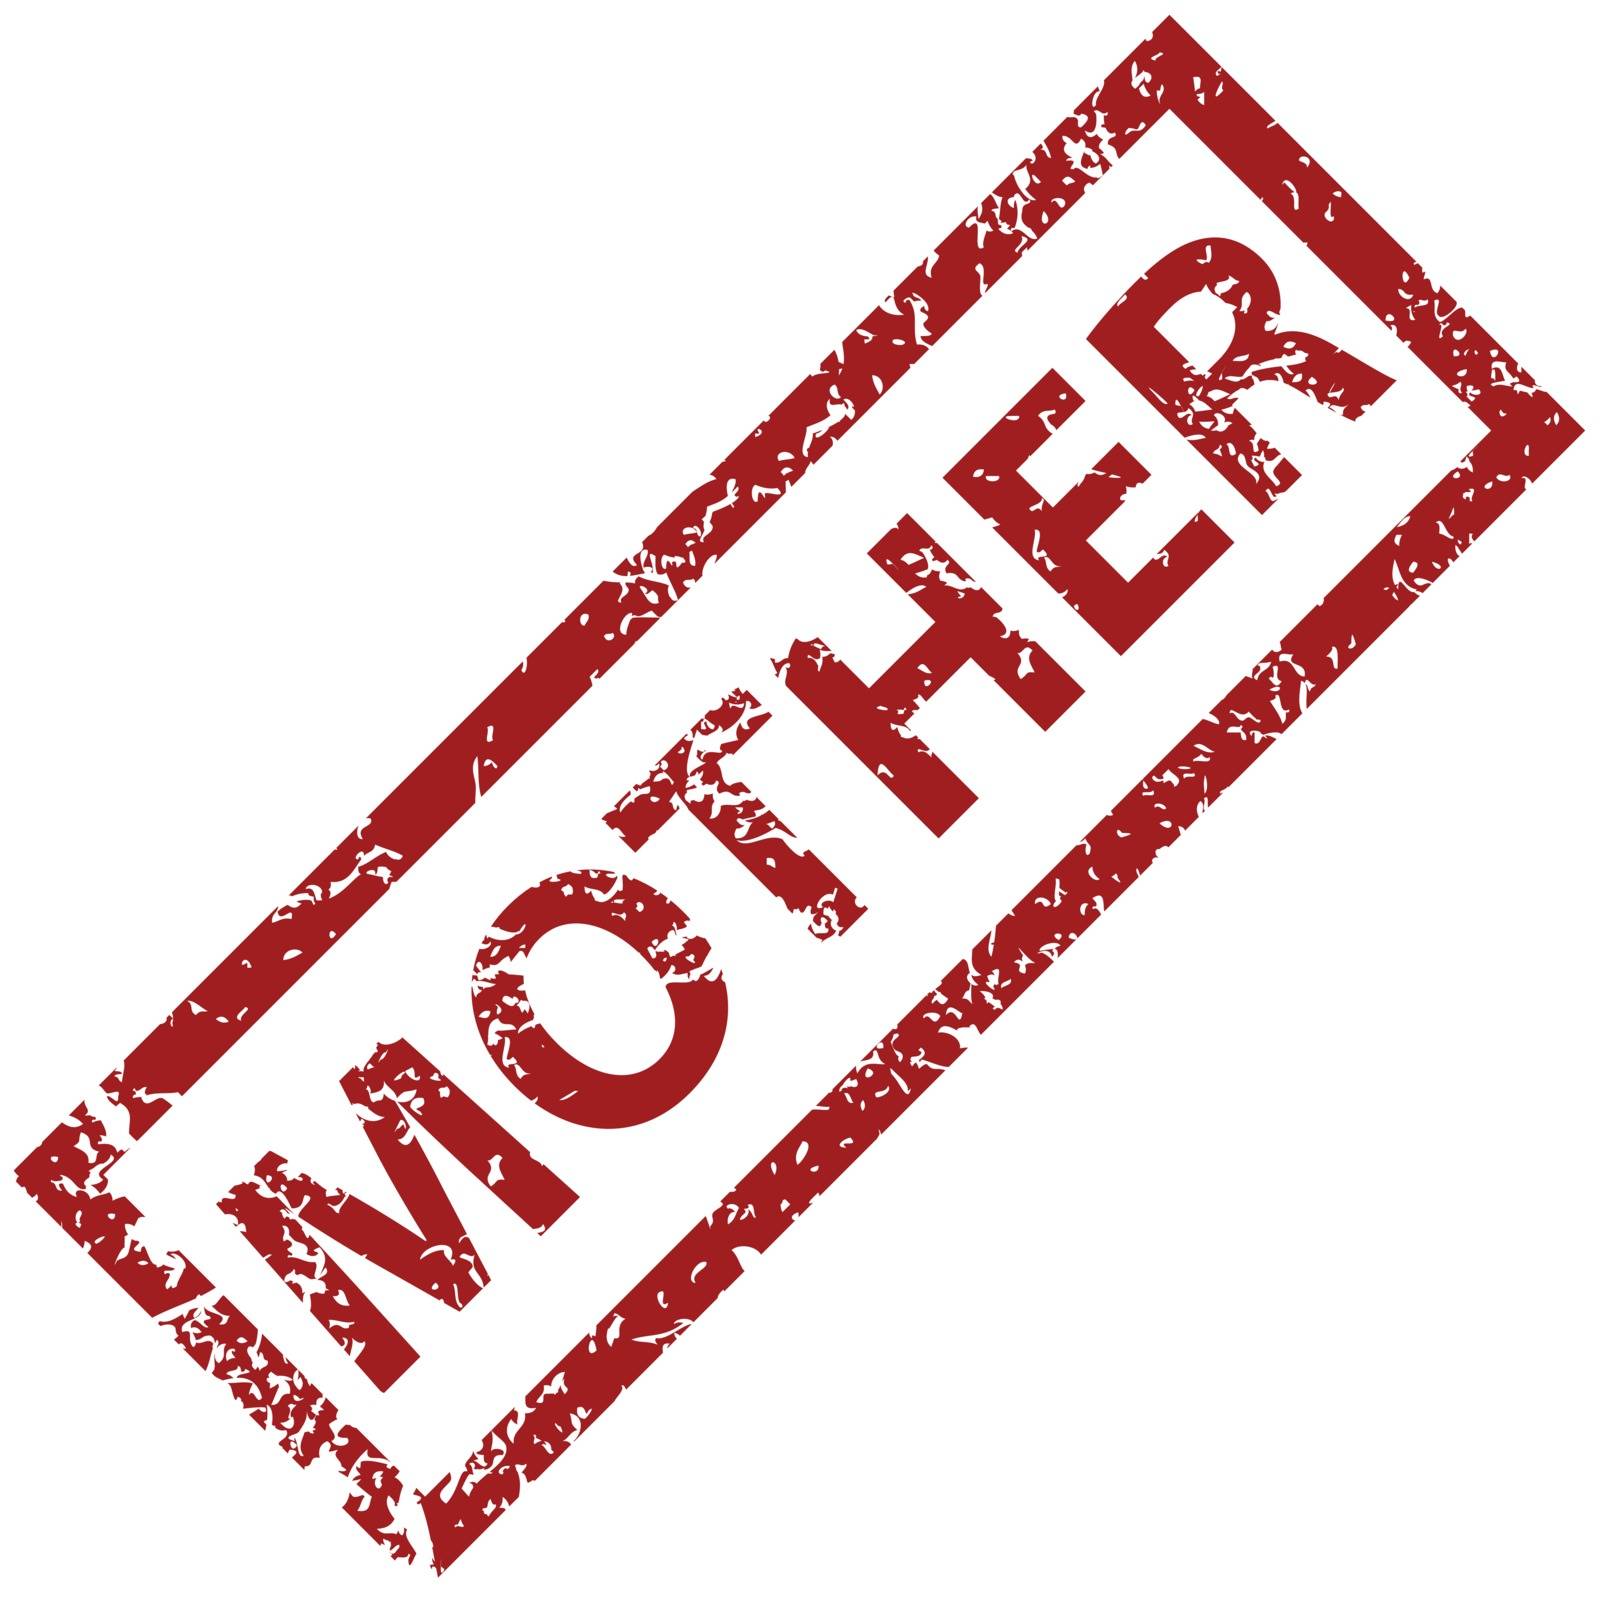 Mother grunge rubber stamp on a white background. Vector illustration